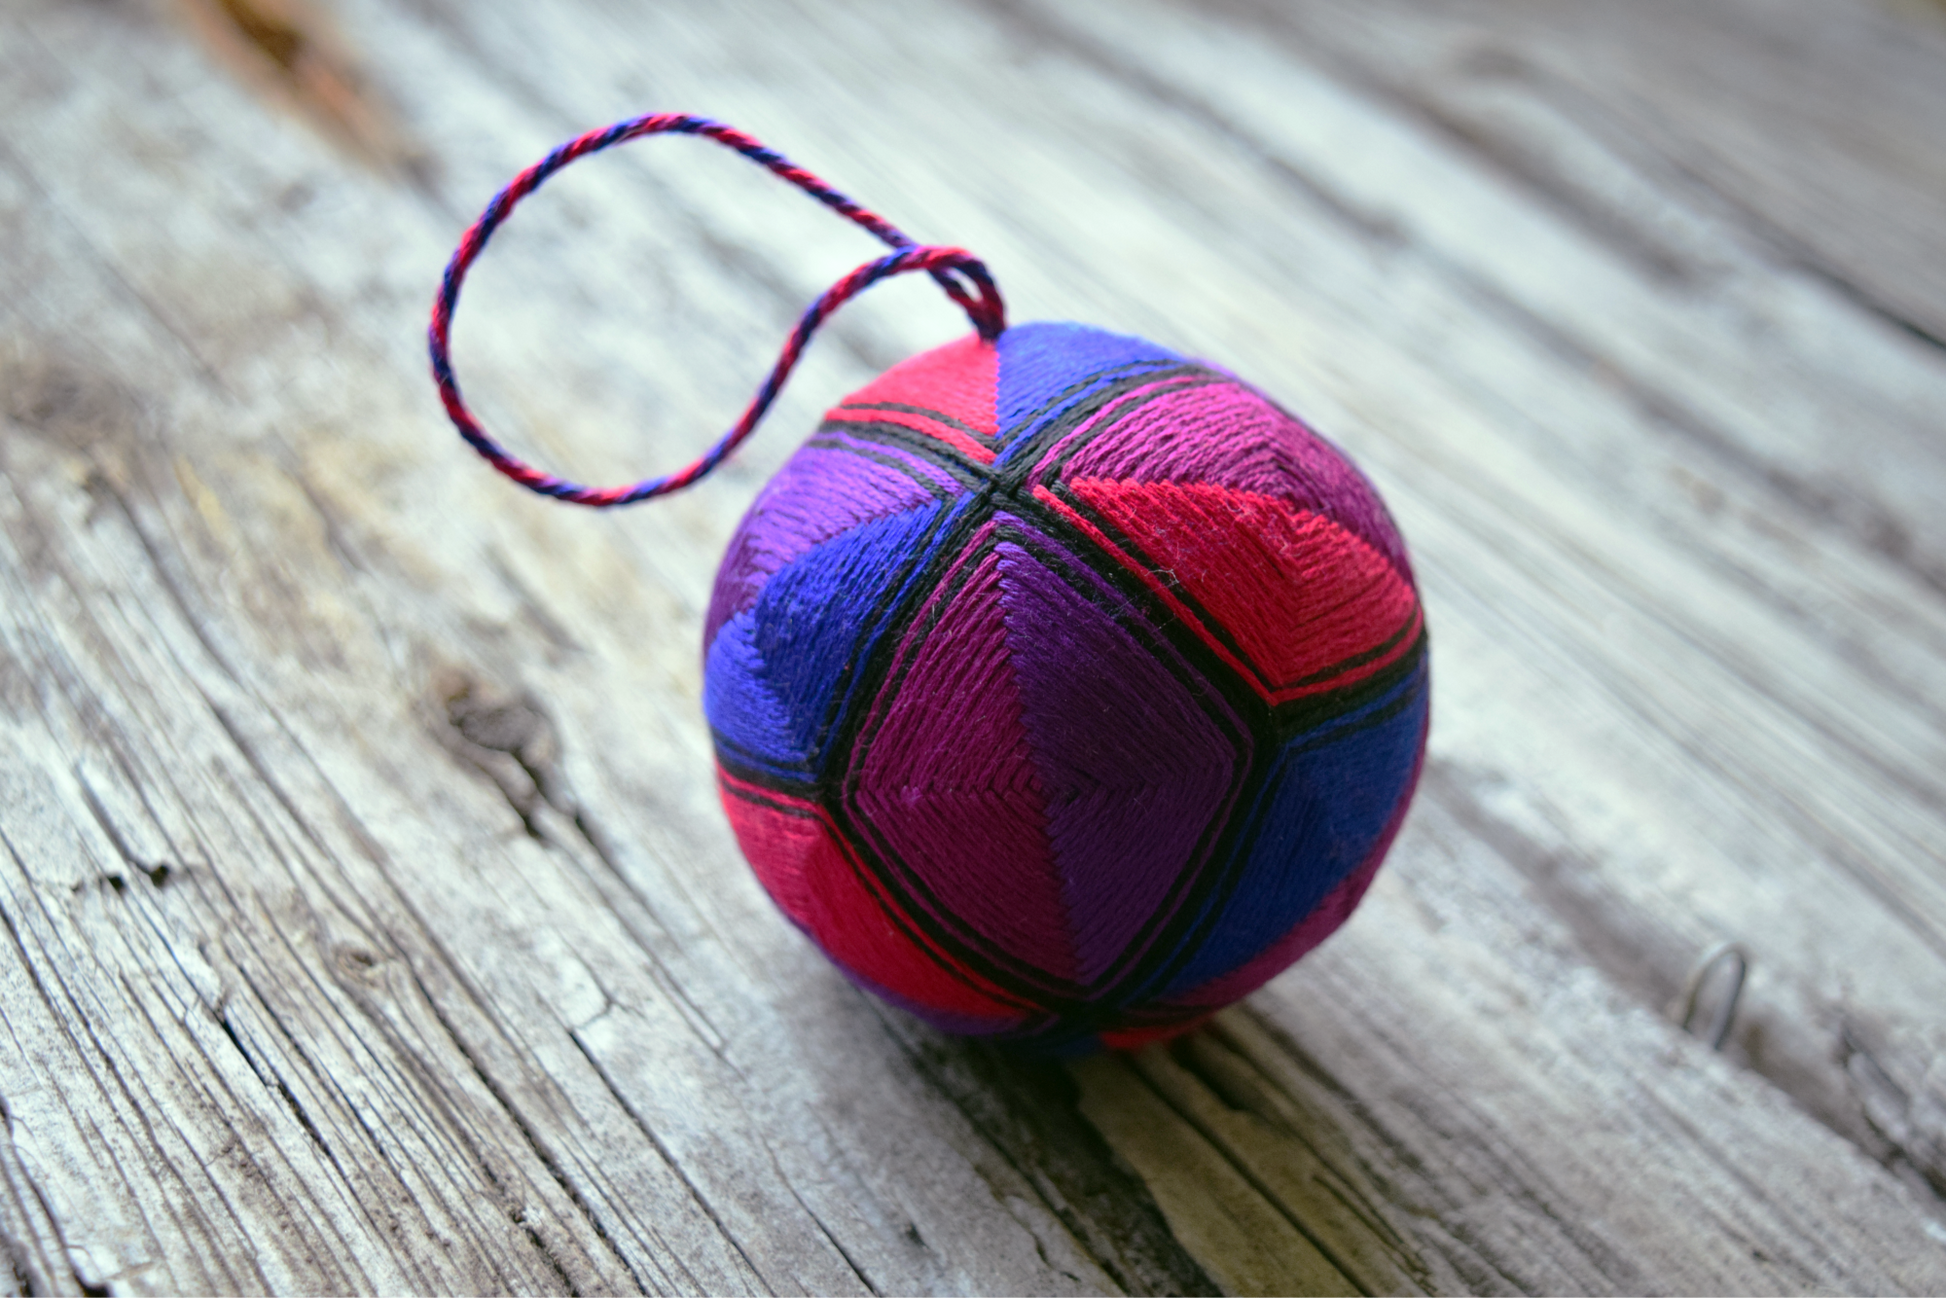 Kousa temari ball in stained glass colors outlined in black thread